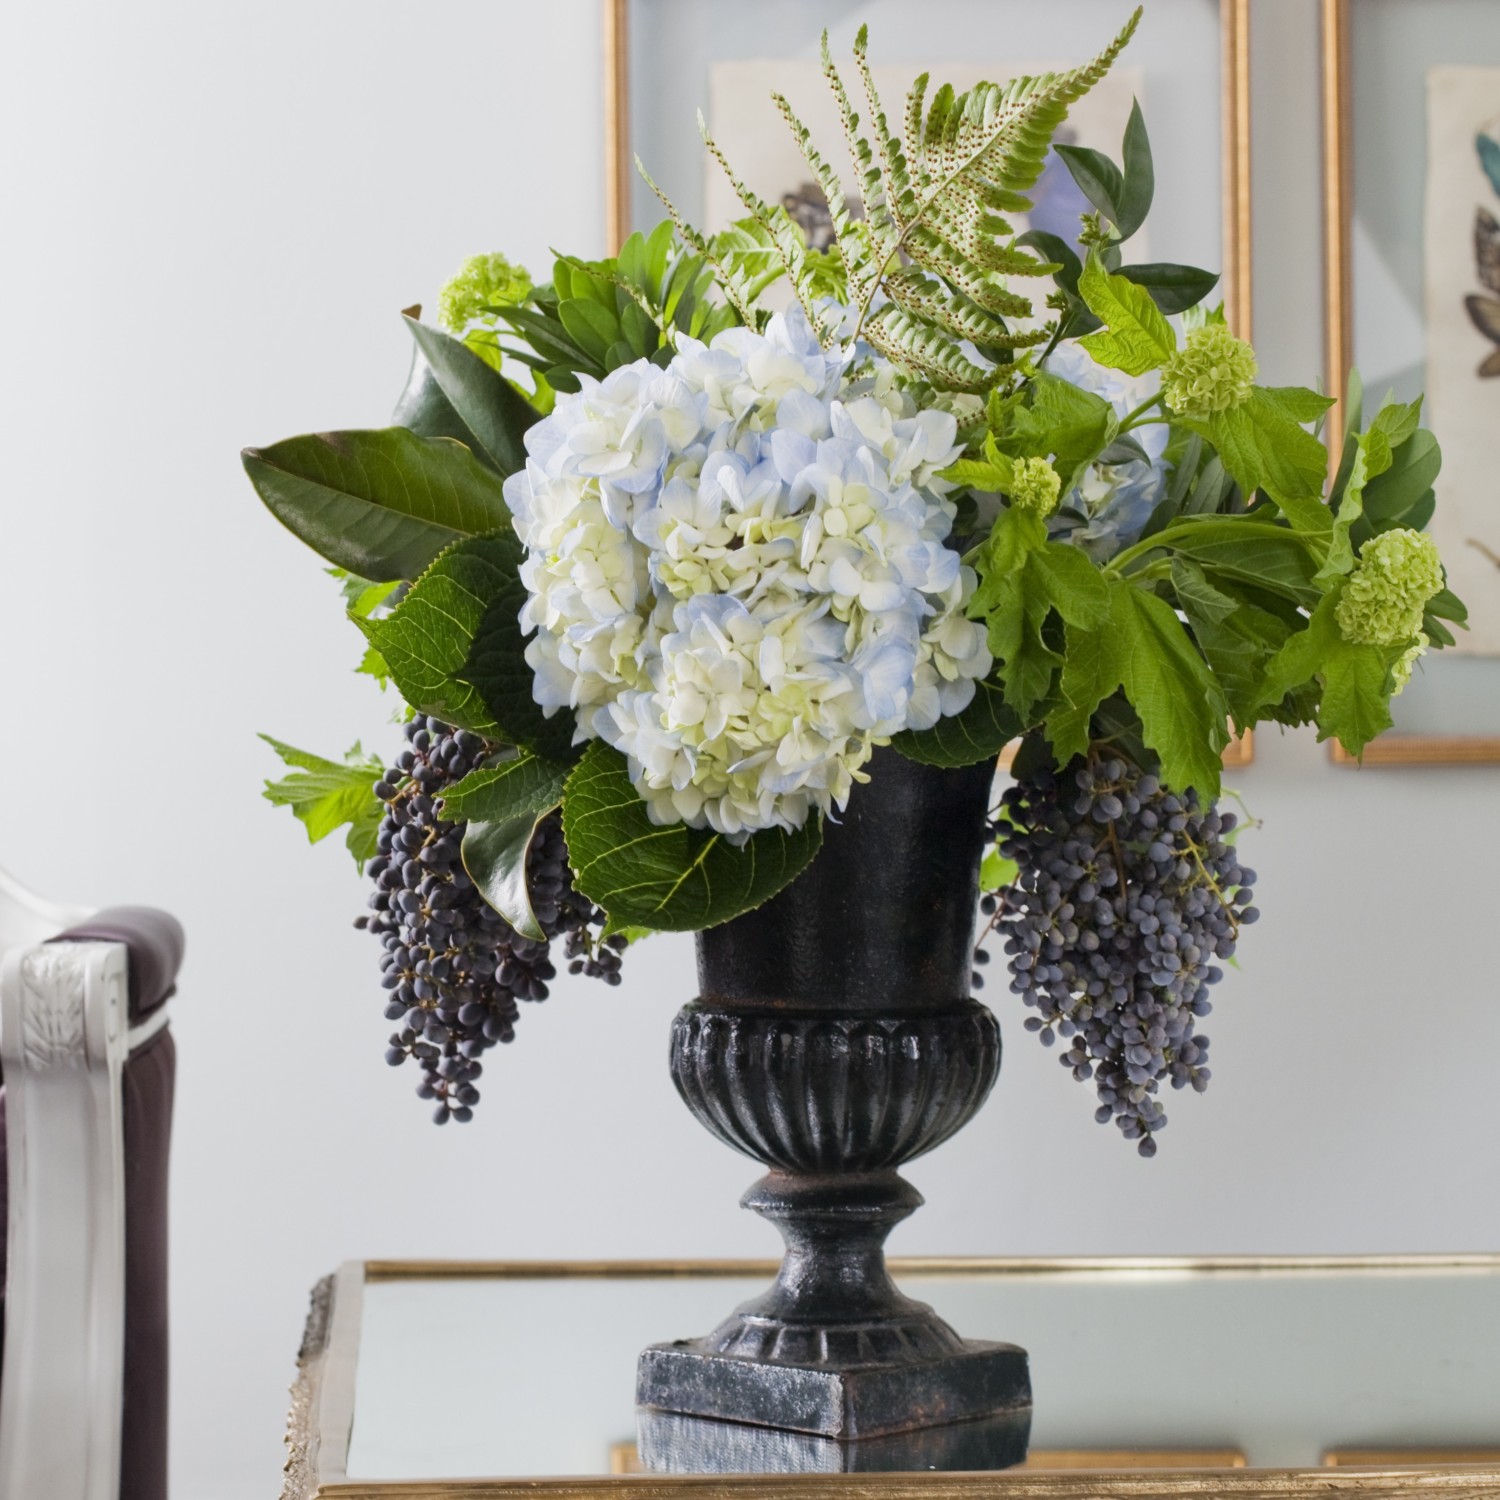 Footed metal urn filled with pale blue hydrangeas, ligustrum berries, viburnum, autumn fern, and foliage.